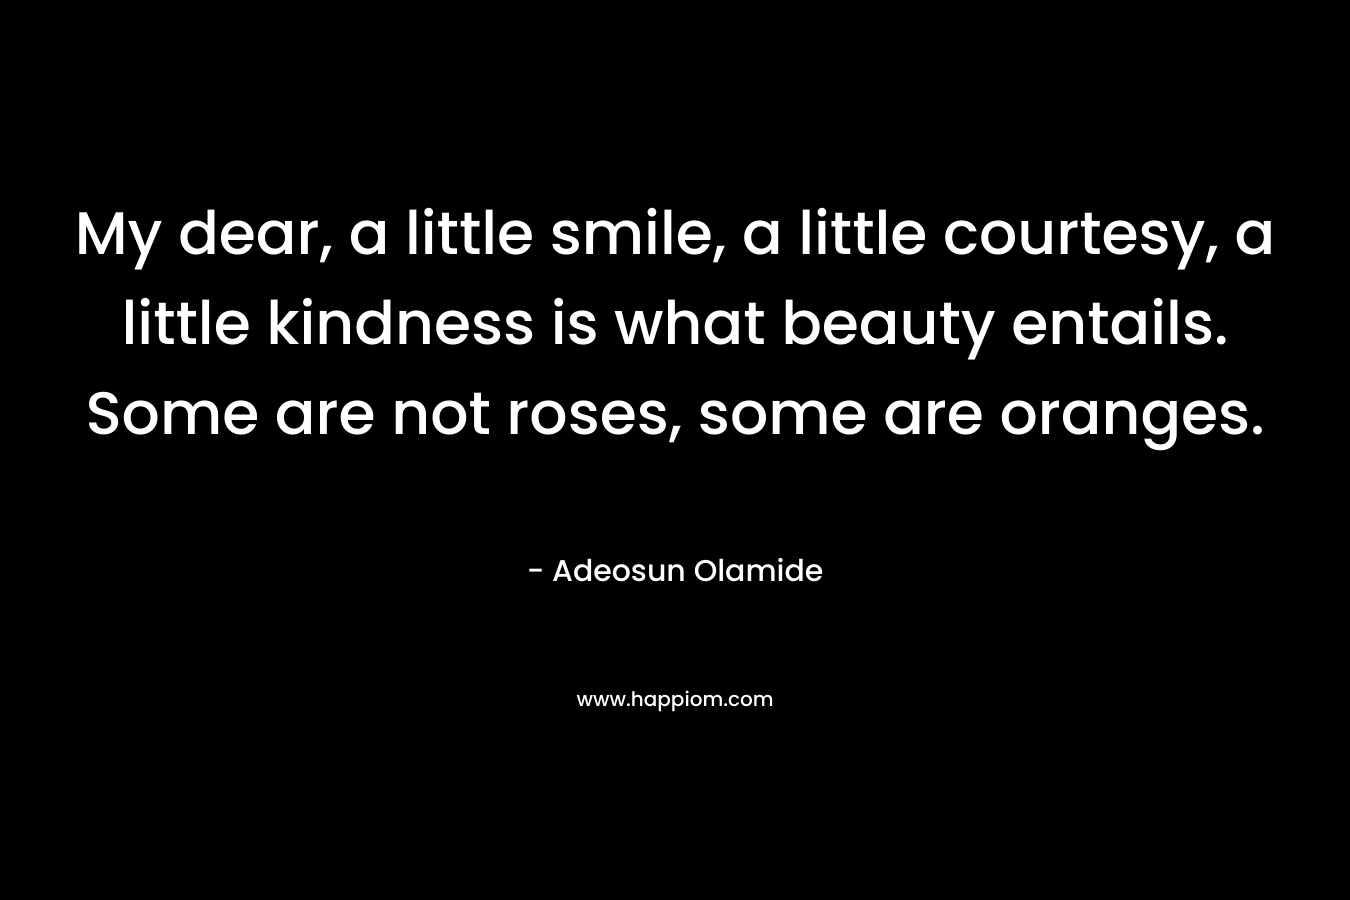 My dear, a little smile, a little courtesy, a little kindness is what beauty entails. Some are not roses, some are oranges. – Adeosun Olamide